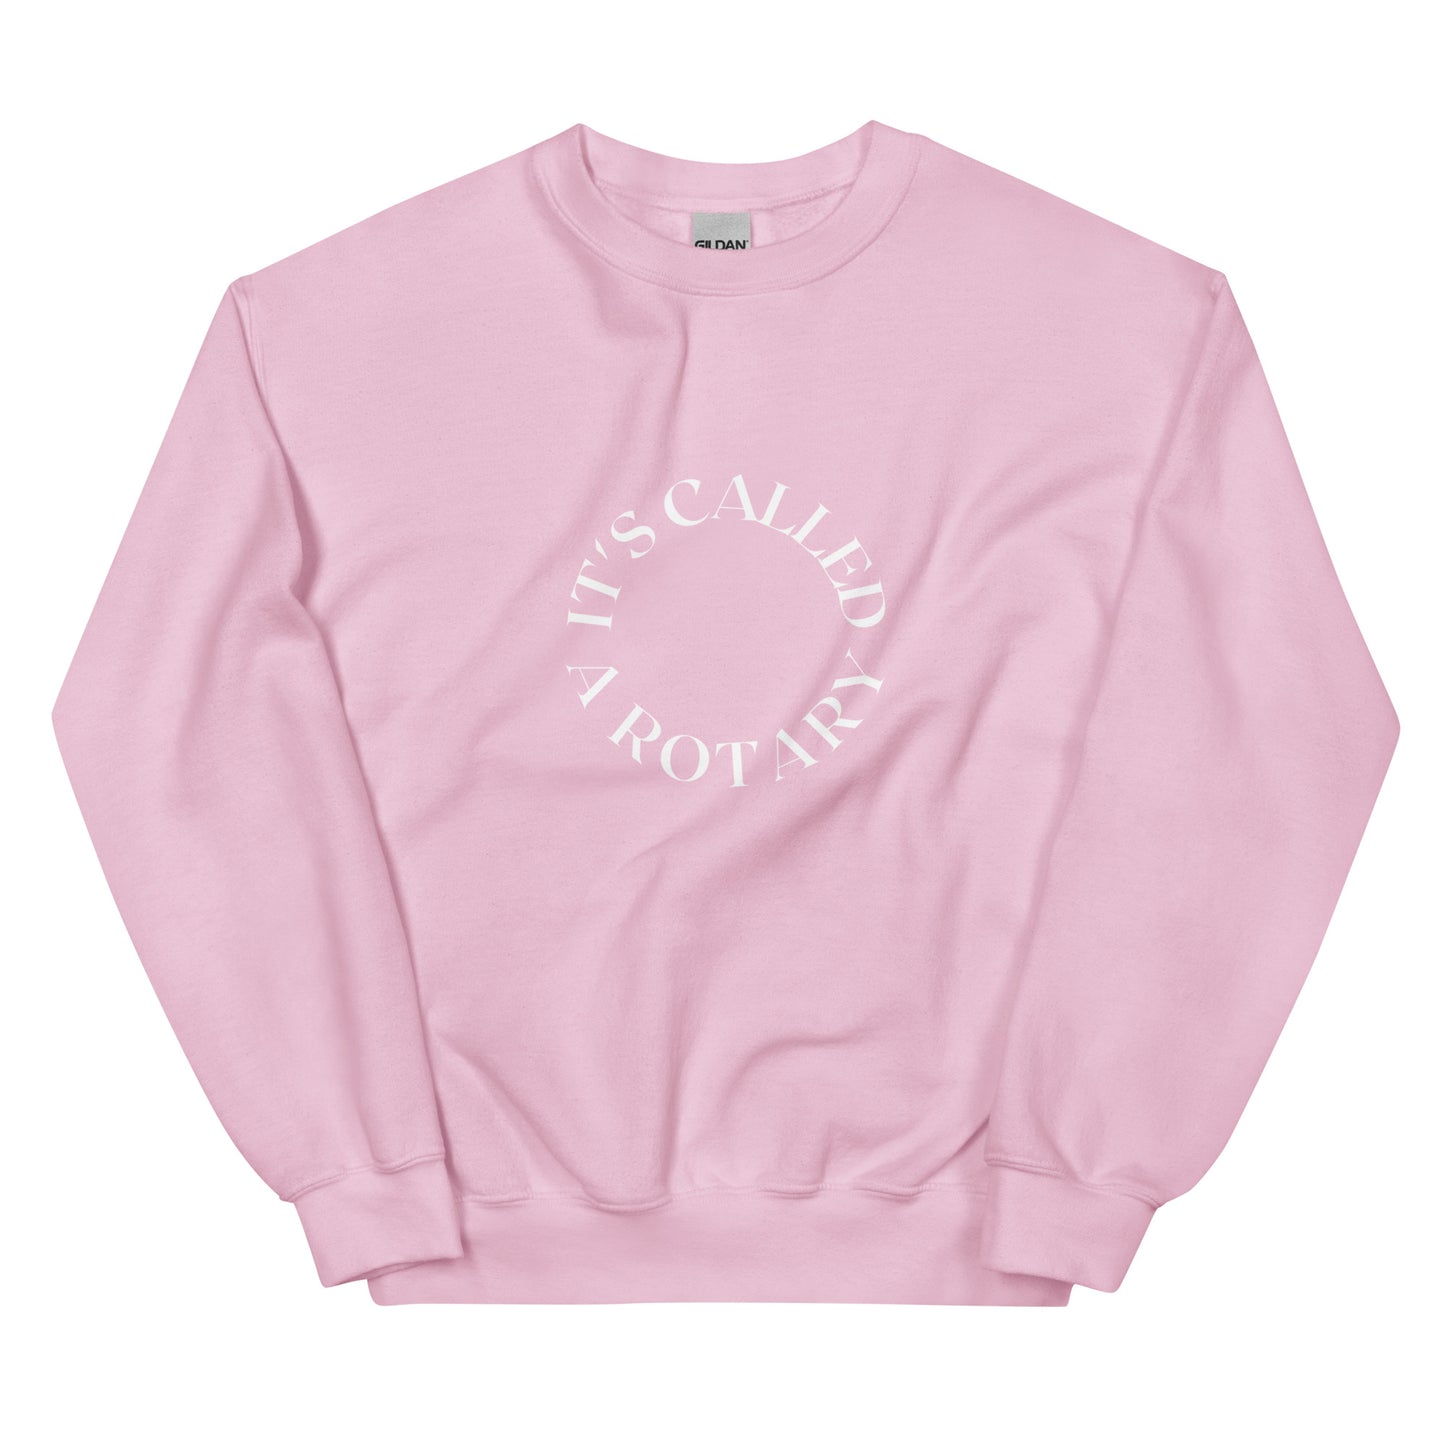 pink crewneck that says "it's called a rotary" in white lettering shaped in a circle